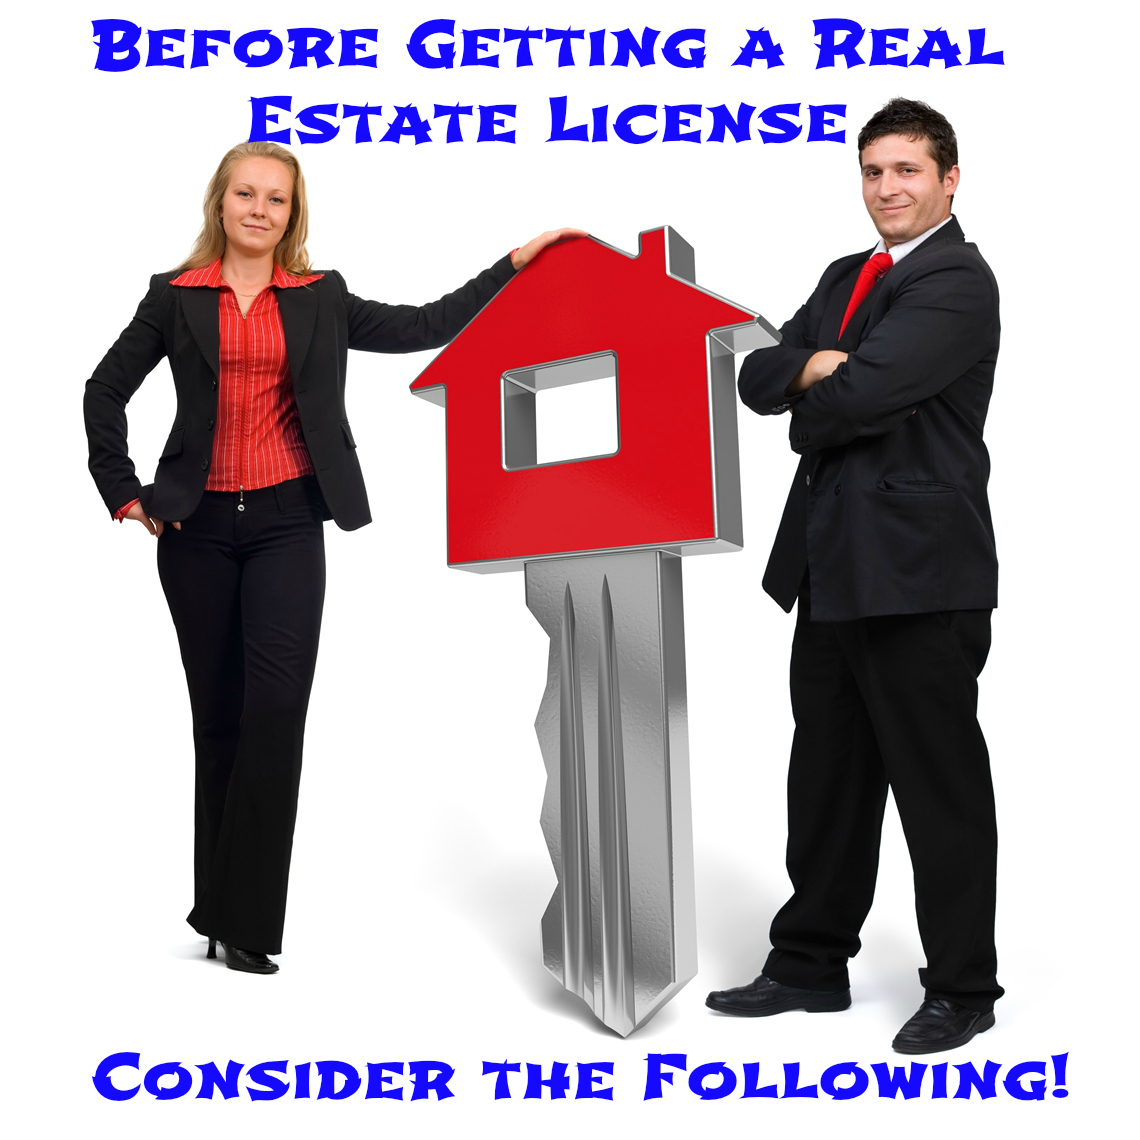 Before Getting a Real Estate License, Consider These Things!